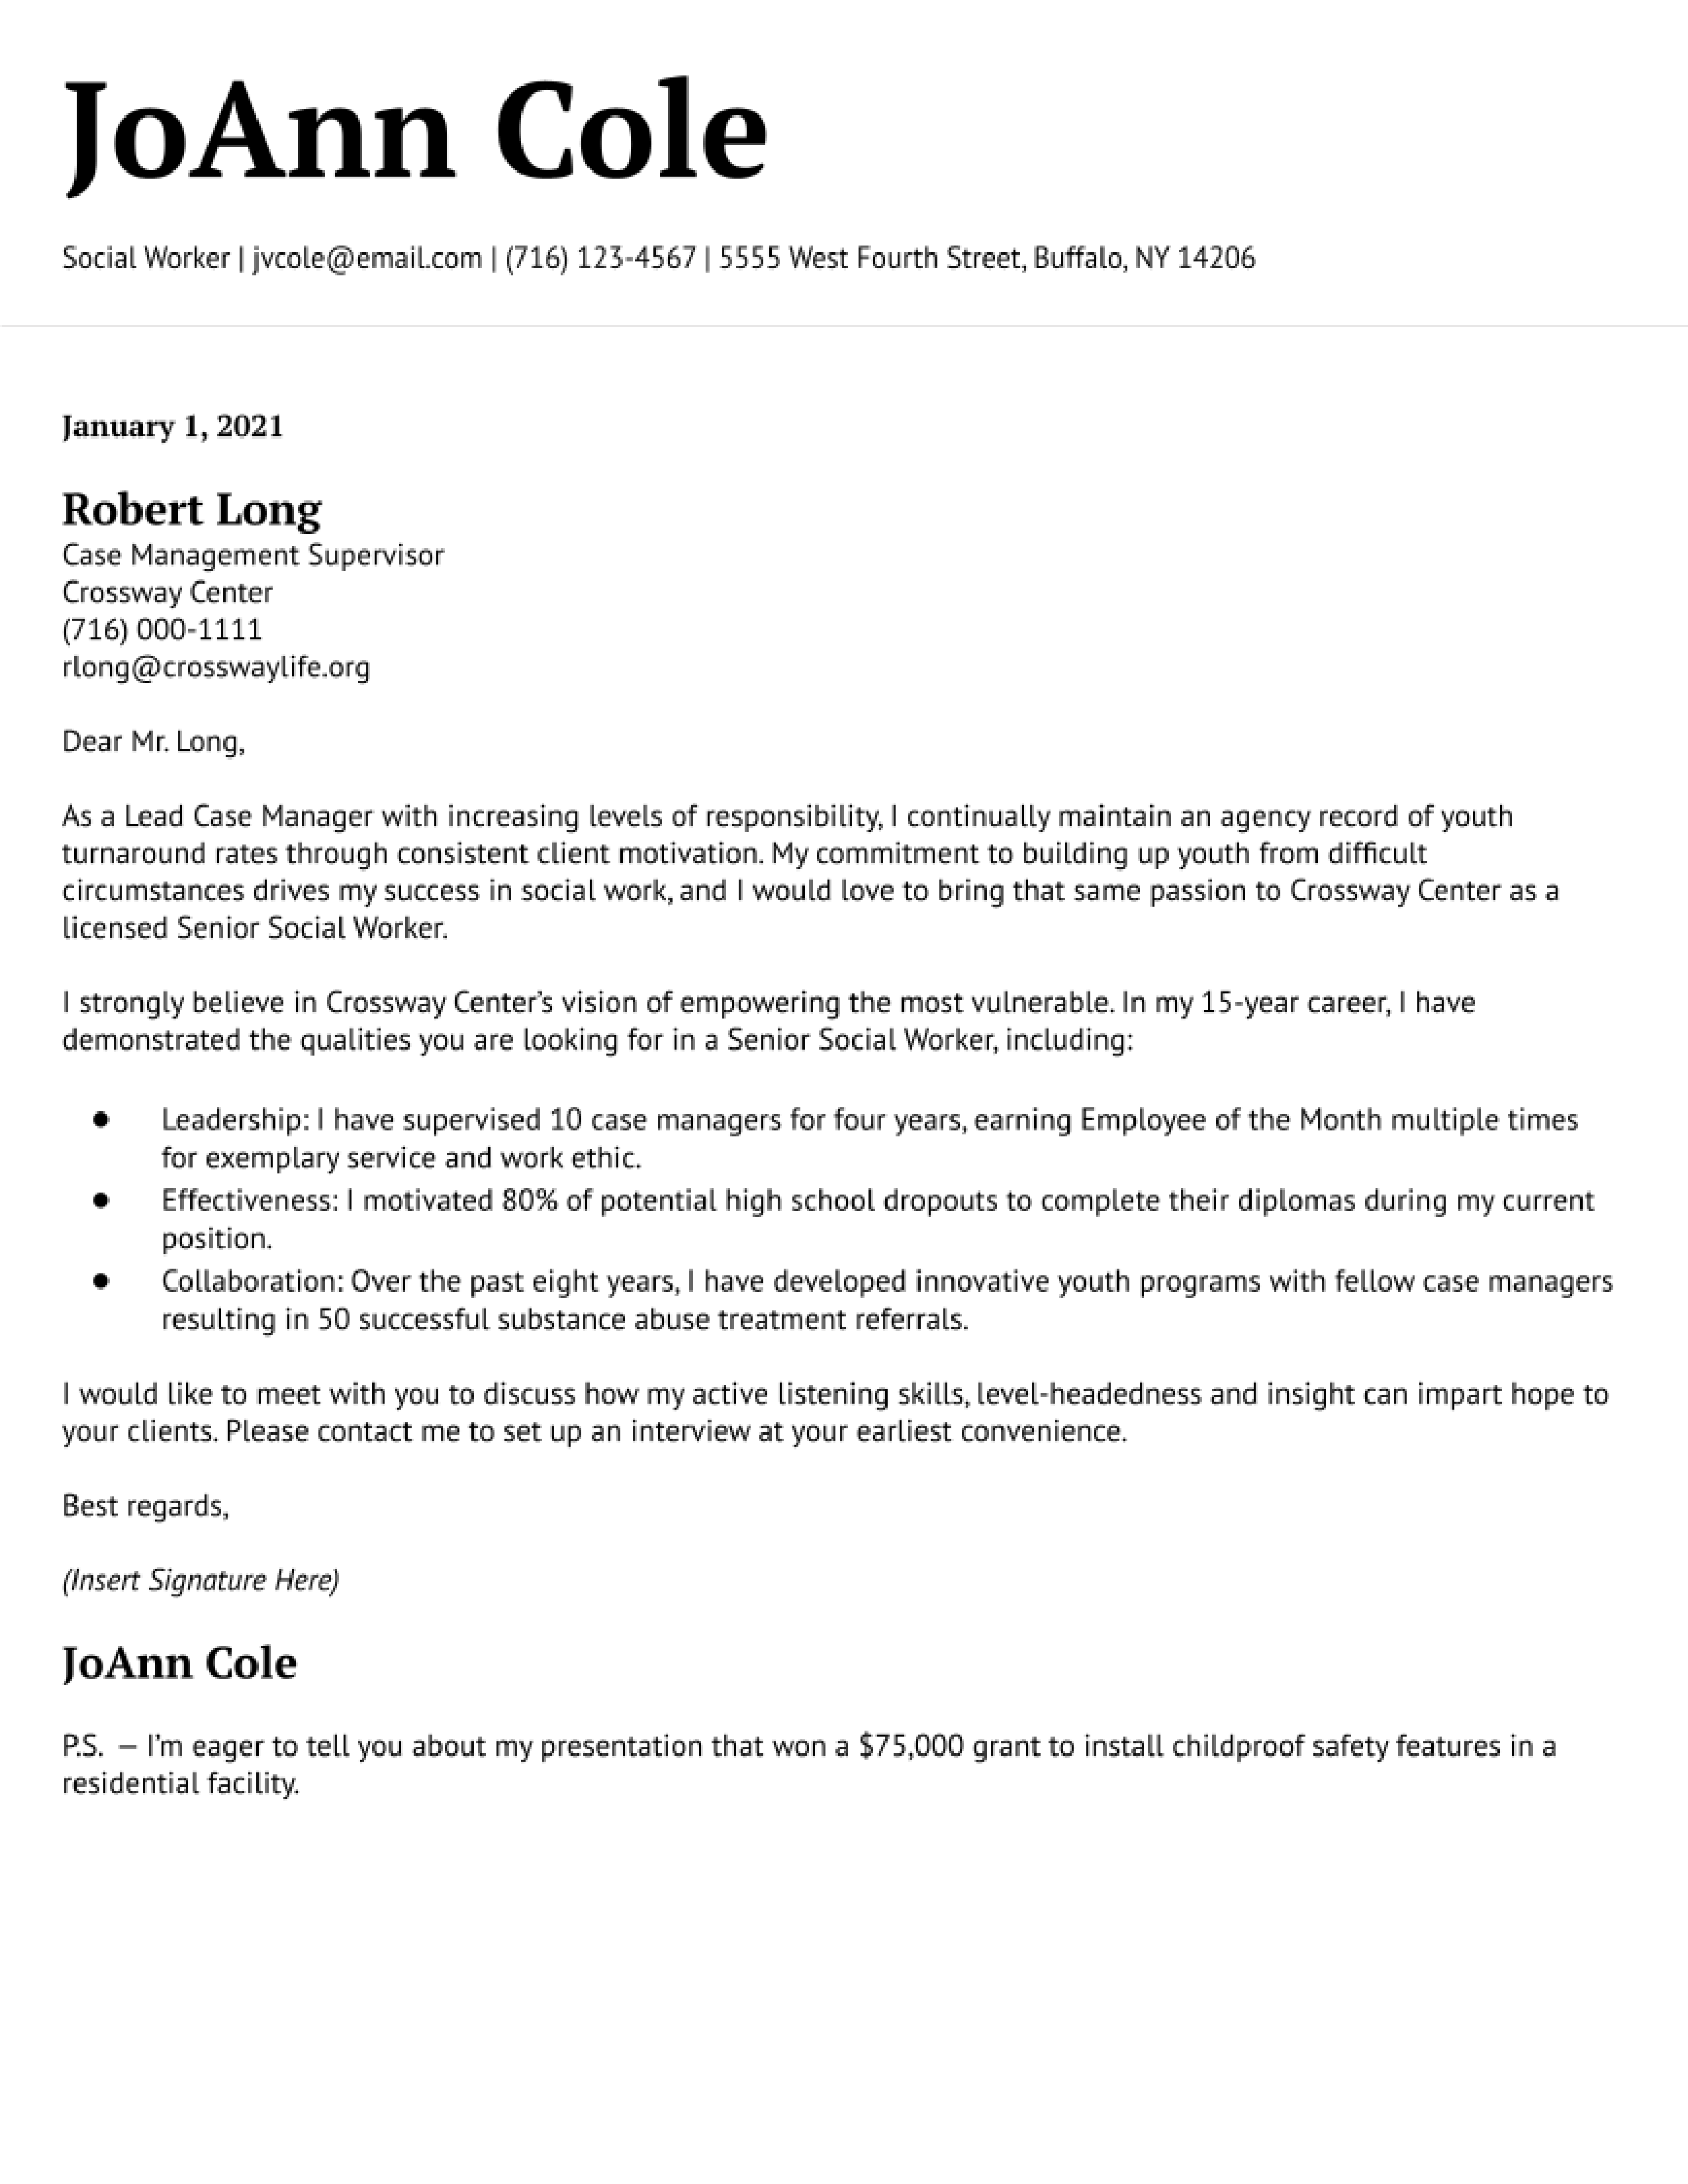 Social Work Cover Letter Examples and Templates for 2024